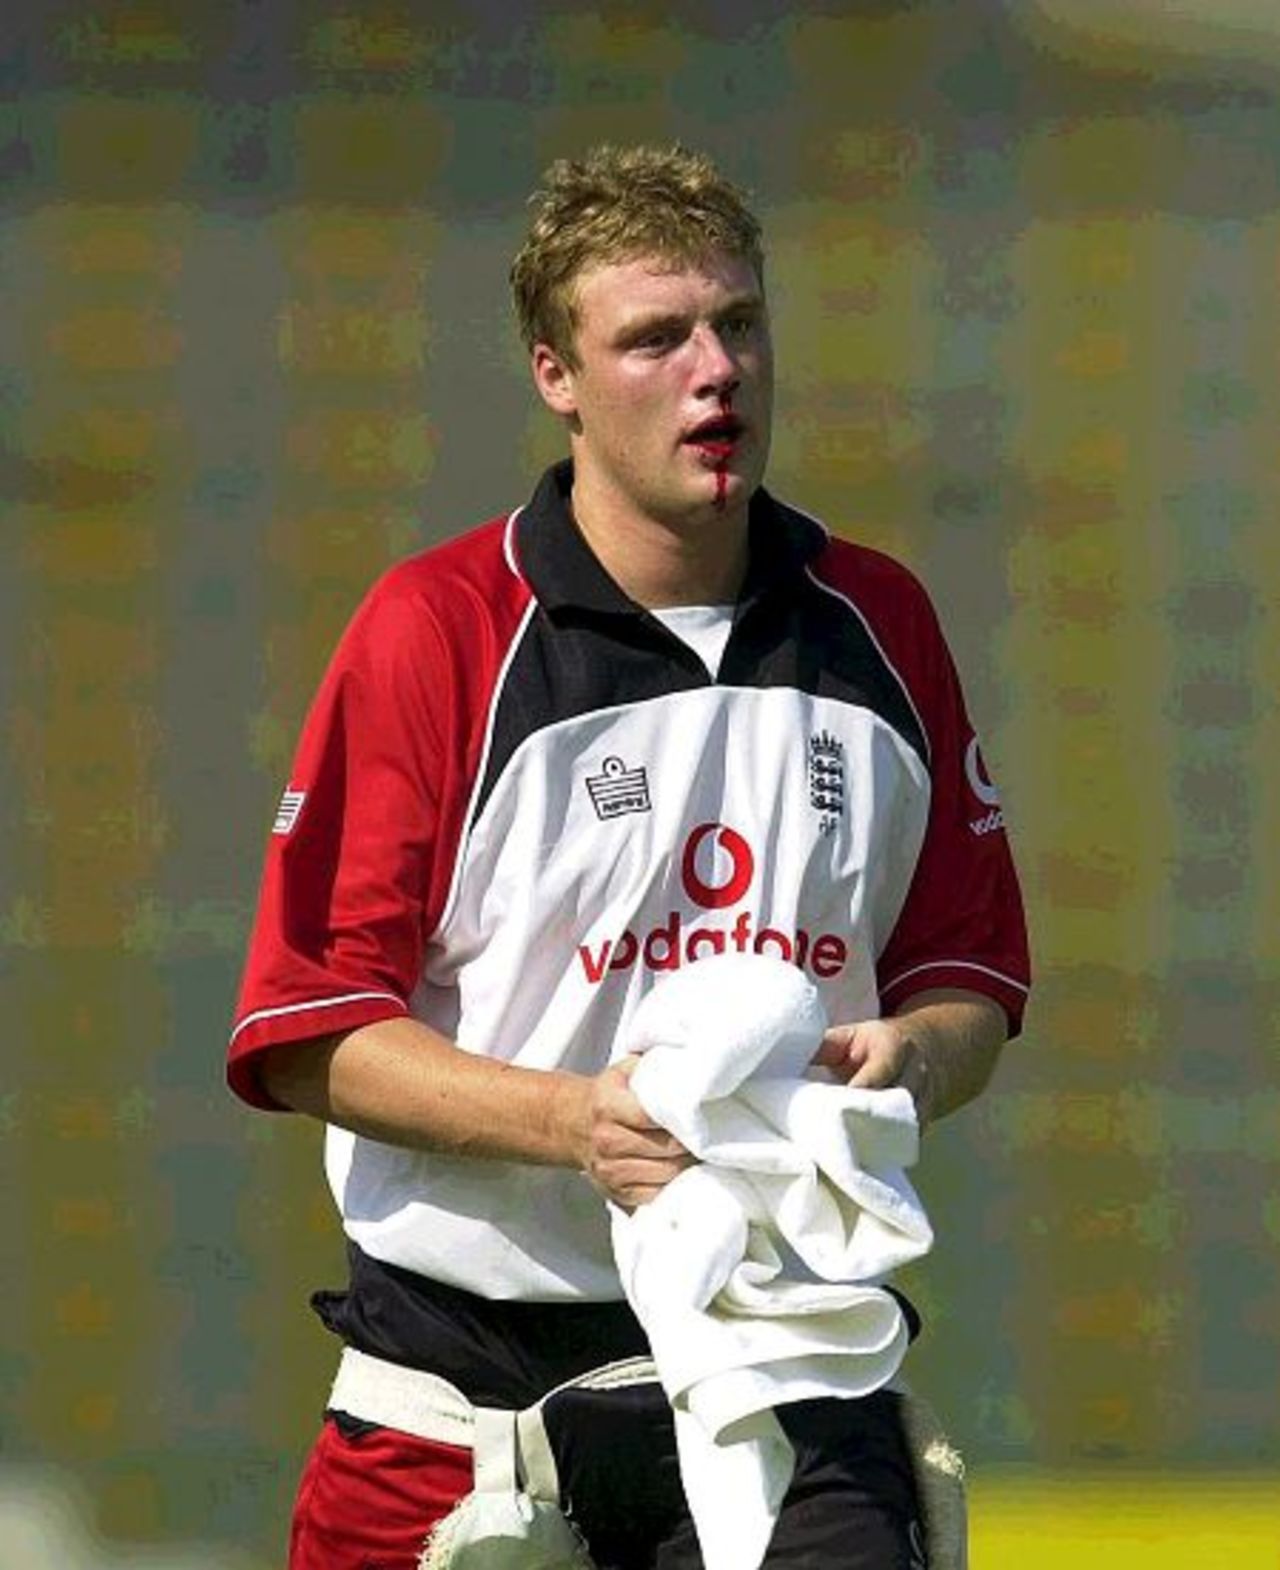 14 Nov 2000: Andrew Flintoff of England walks back the pavilion after being hit in the face with a ball during the England nets session prior to the 1st Test against Pakistan at the Gadaffi Stadium, Lahore, Pakistan.